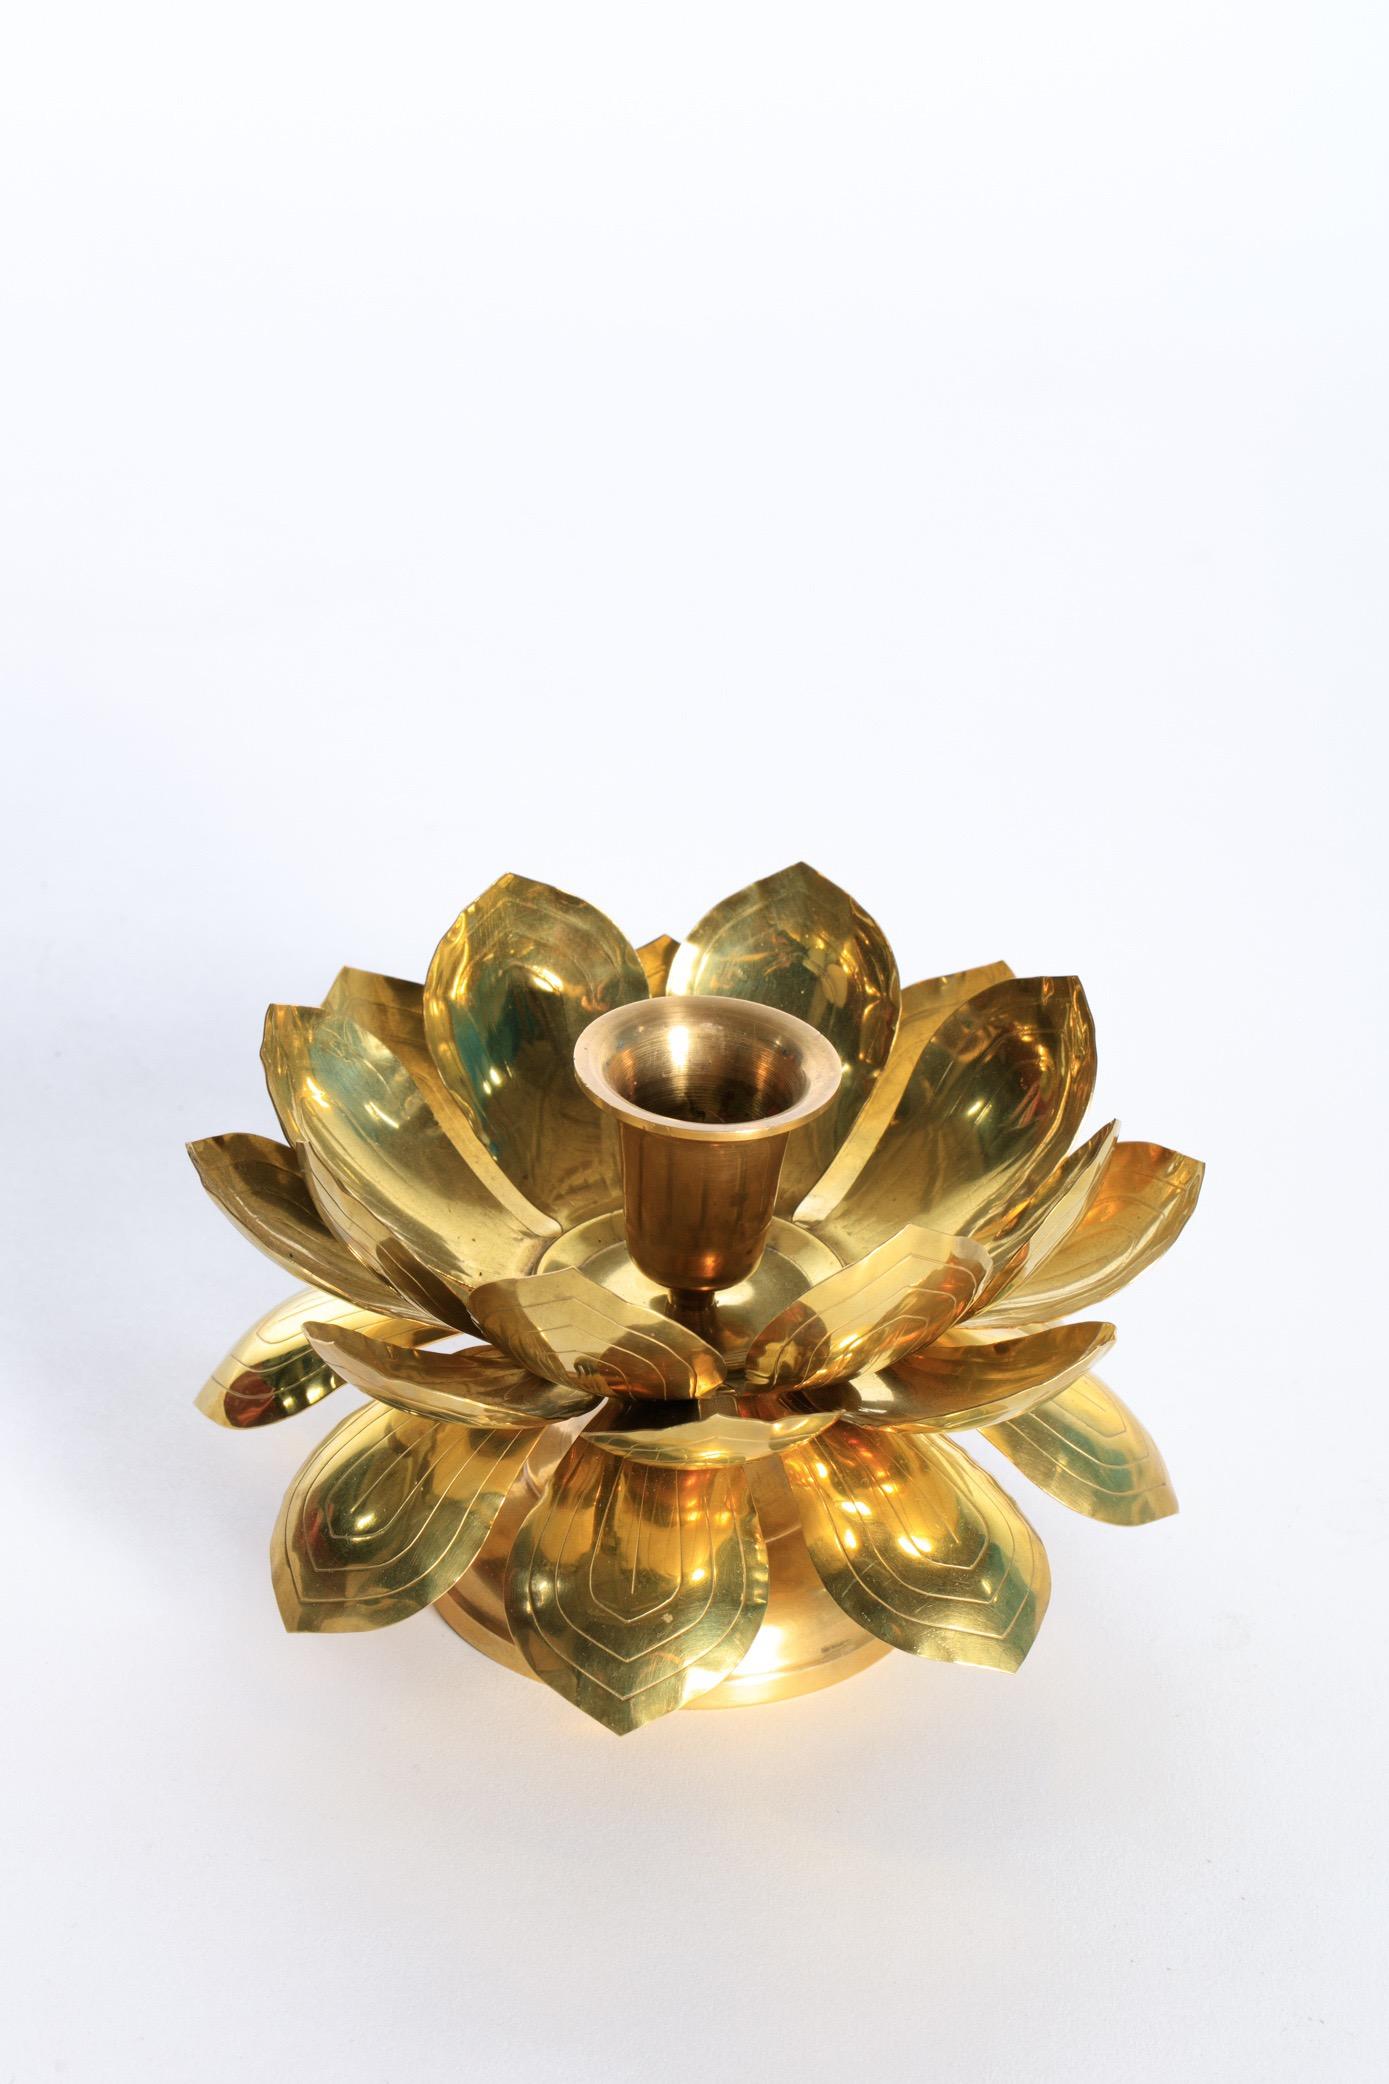 Beautiful brass lotus flower candle holders by Feldman Lighting in the style of Parzinger. Unique to most Feldman lotus flower pieces, the petals can be rearranged so the lotus flower is in early, mid or full bloom. Simply unscrew the candle cup and